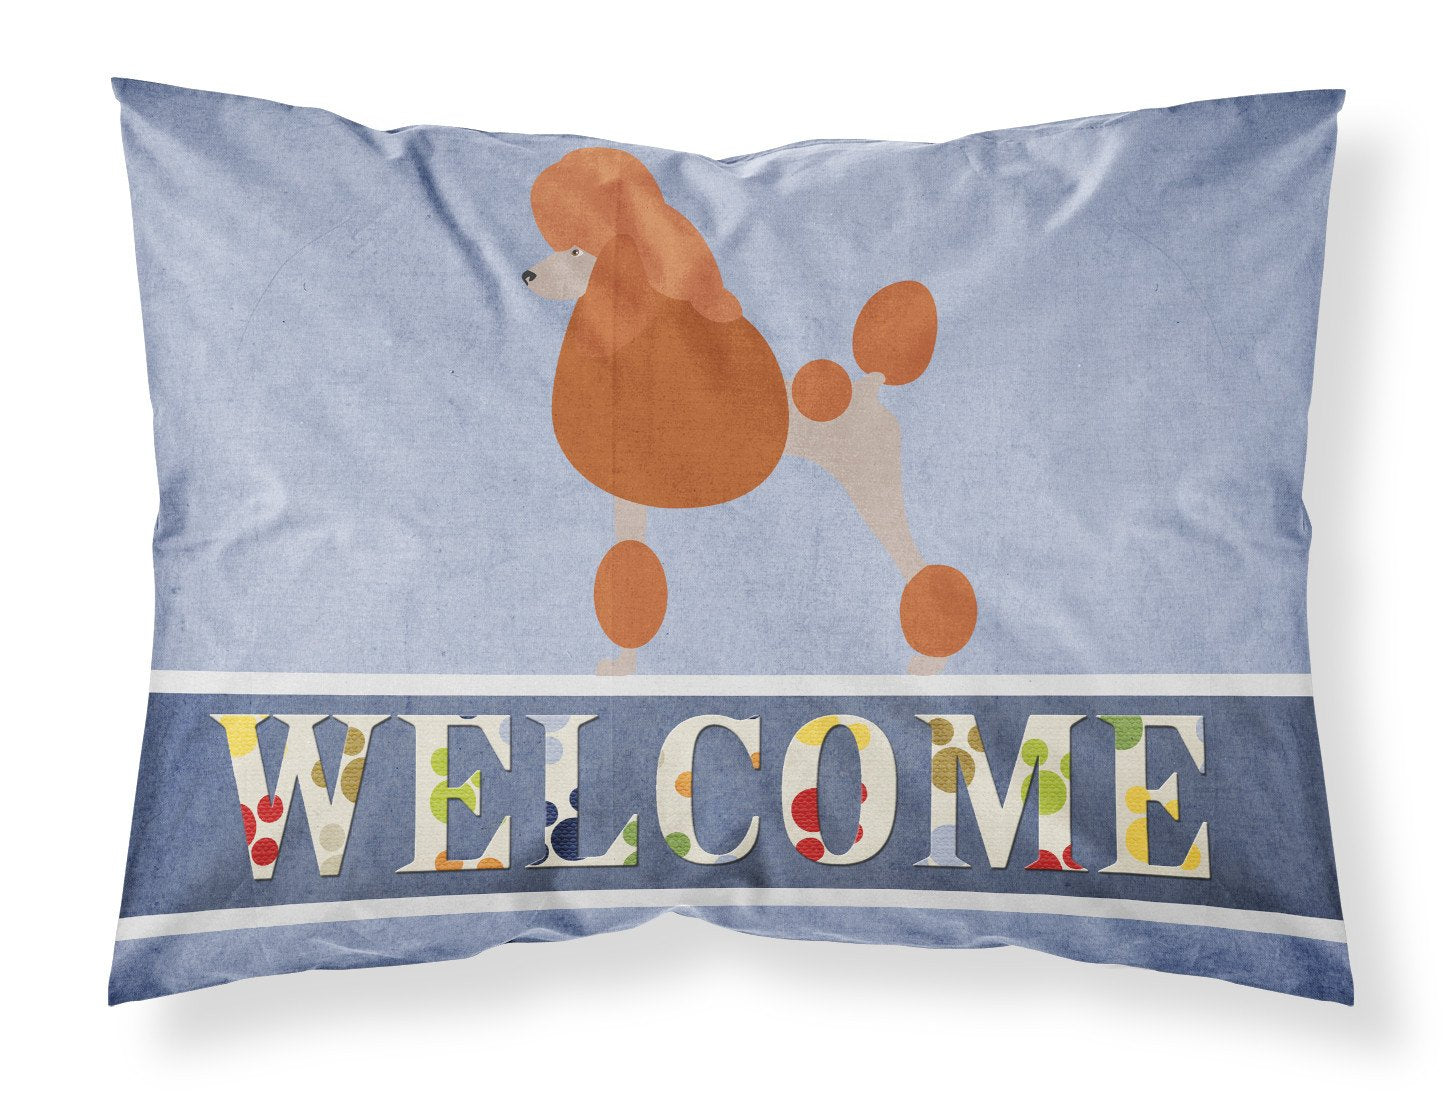 Royal Poodle Welcome Fabric Standard Pillowcase BB8311PILLOWCASE by Caroline's Treasures